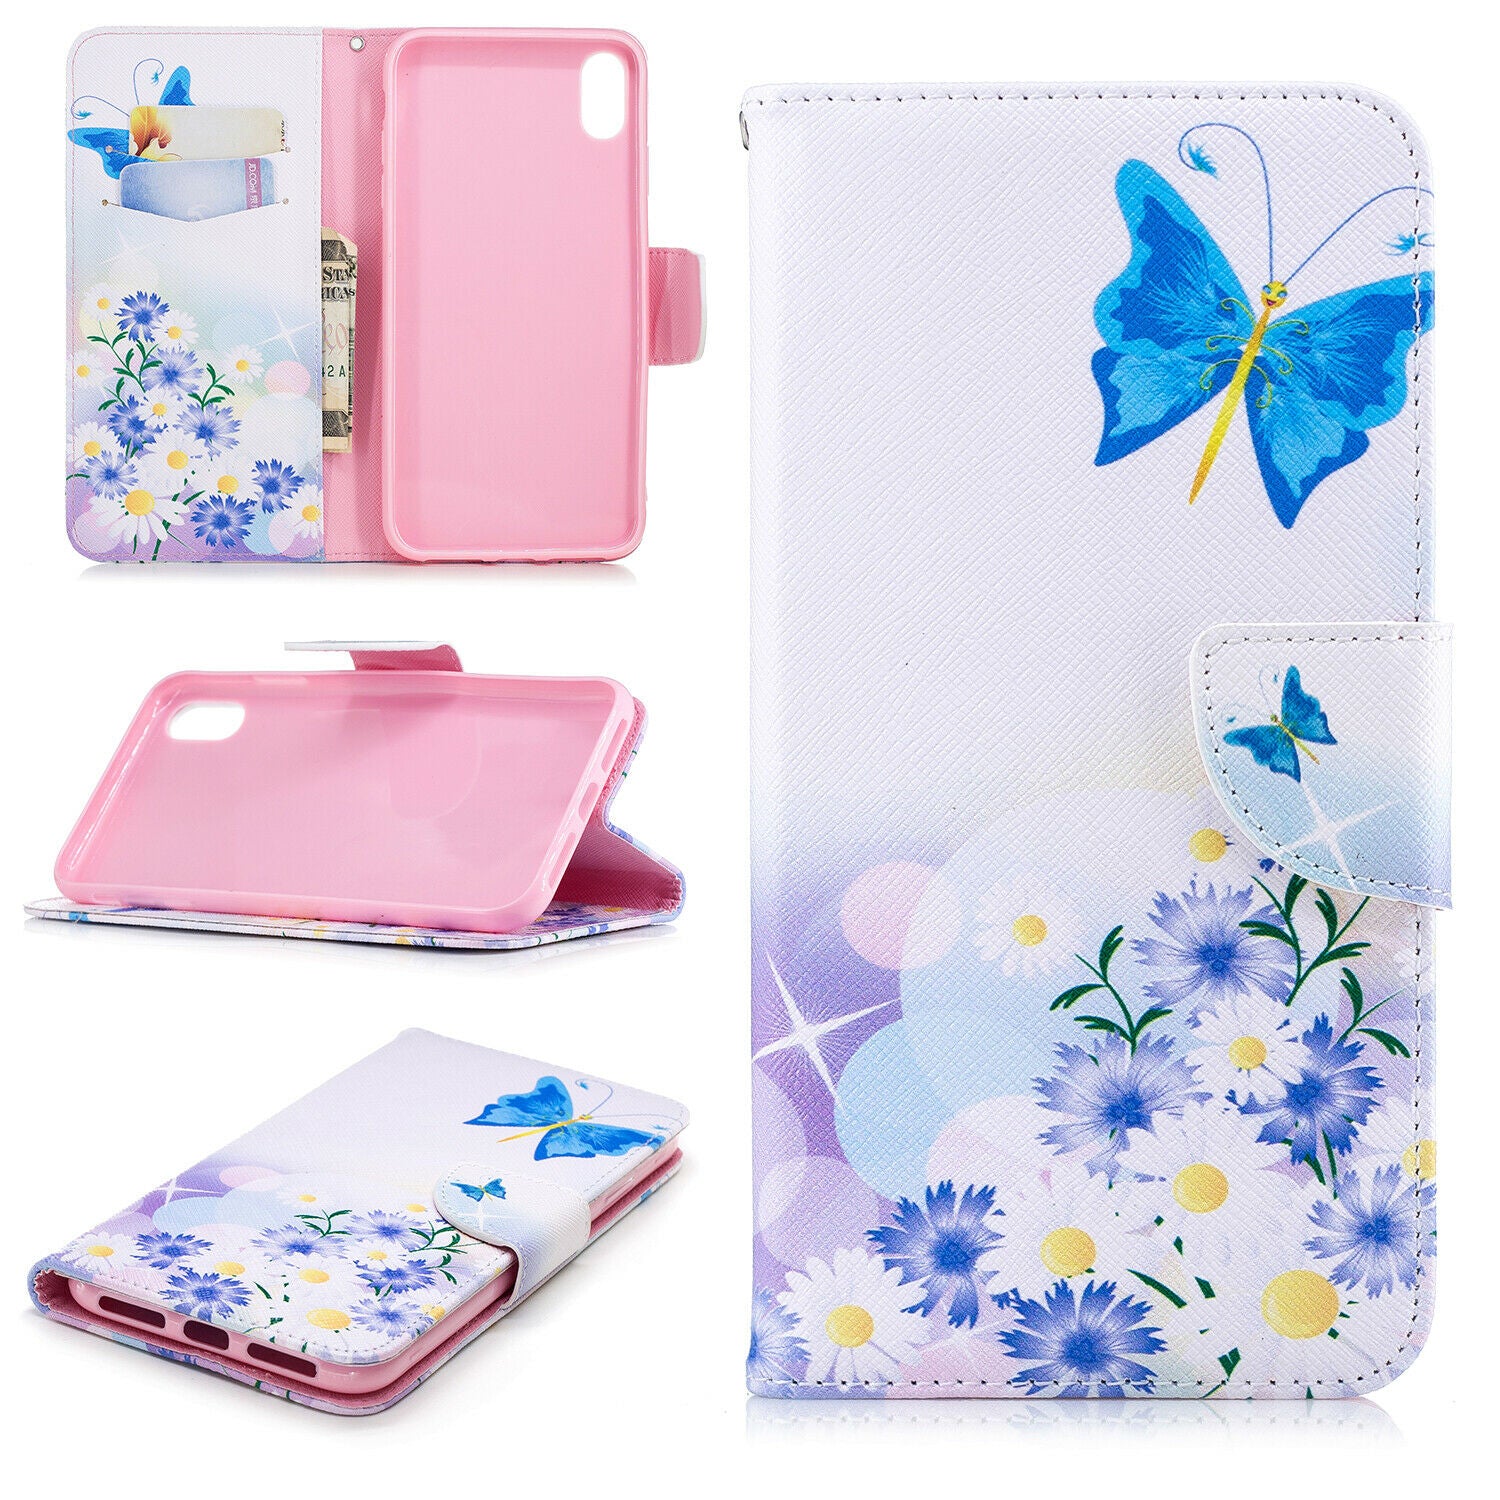 Samsung Galaxy A50 Wallet Leather Case Flip Magnetic Card Slot Cover-Blue Butterfly